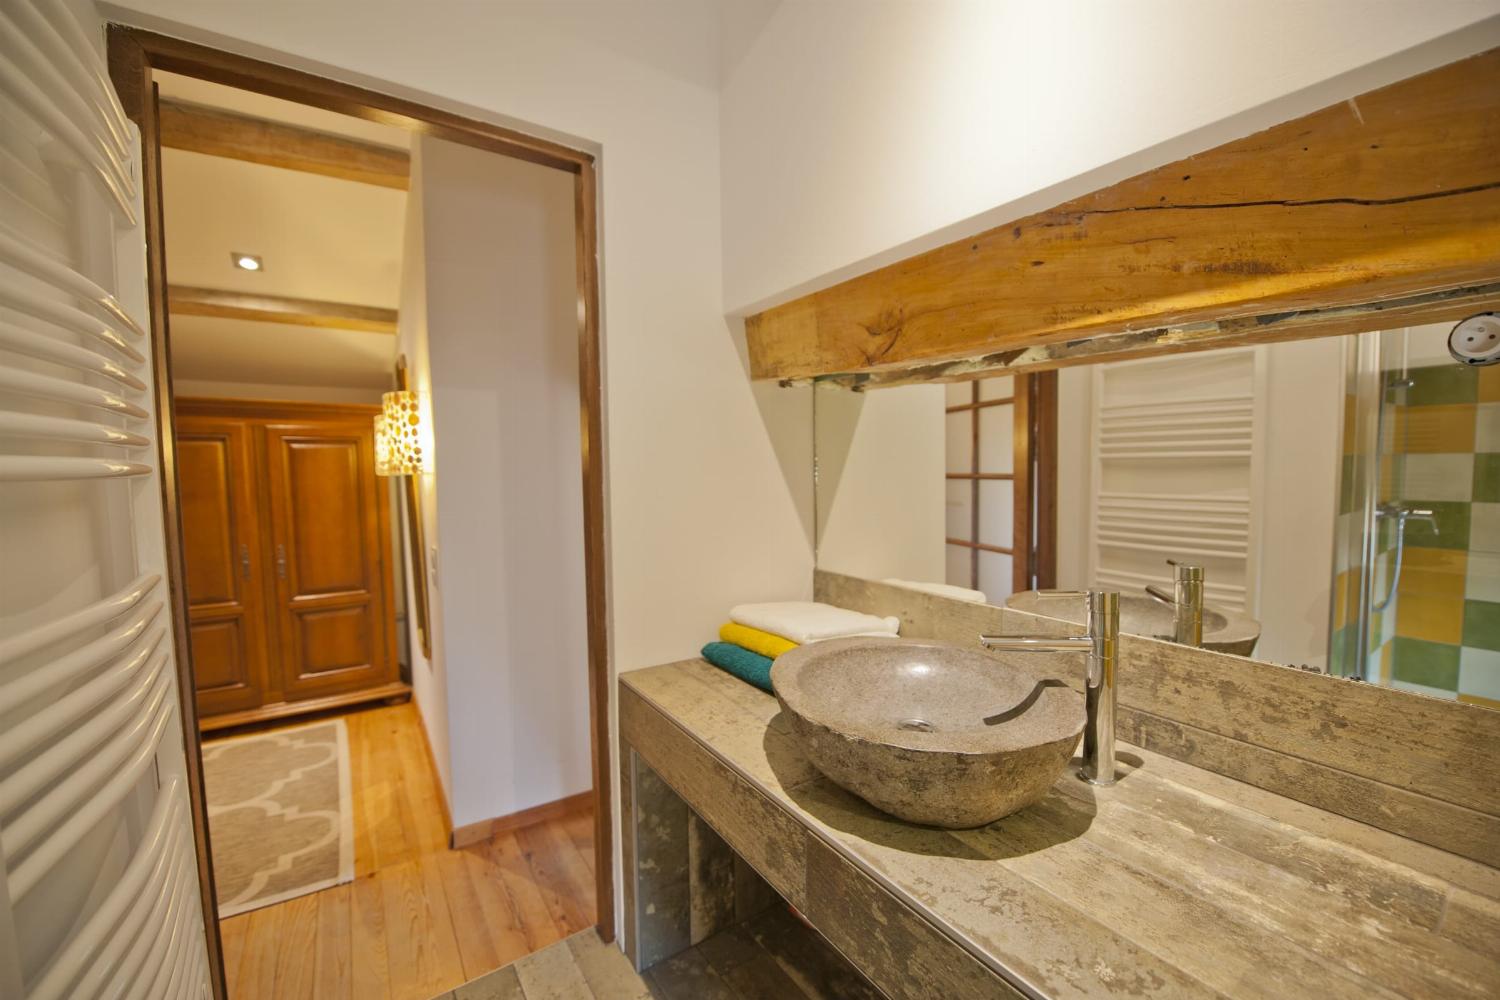 Bathroom | Rental accommodation in Nouvelle-Aquitaine